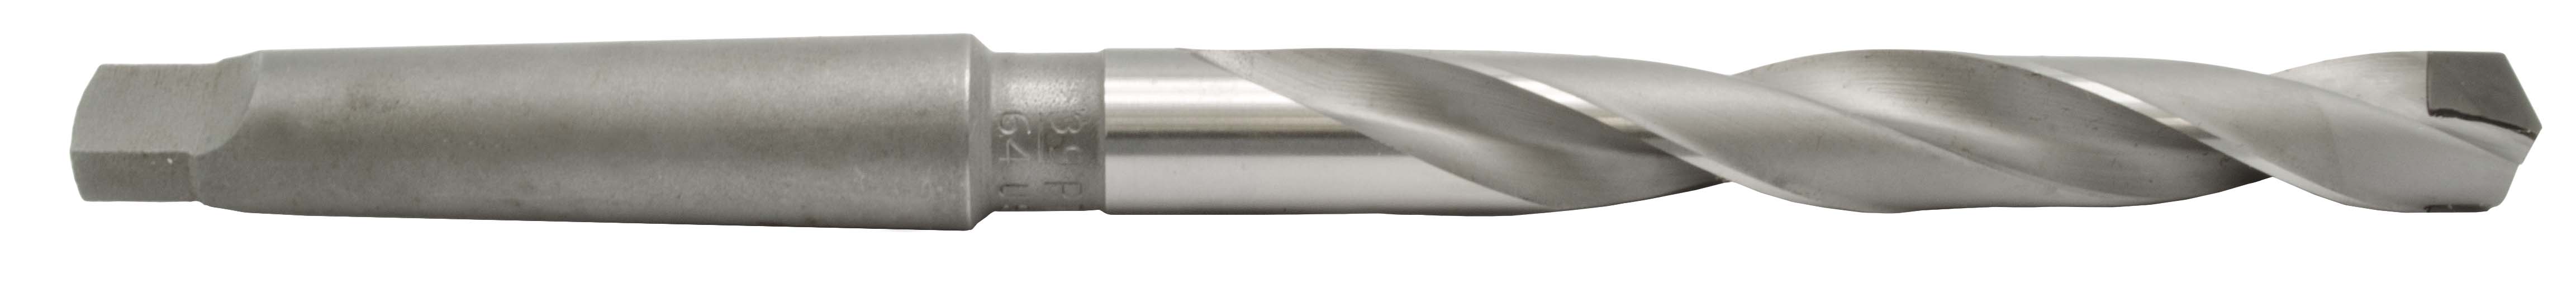 Carbide Tipped Taper Shank Drills